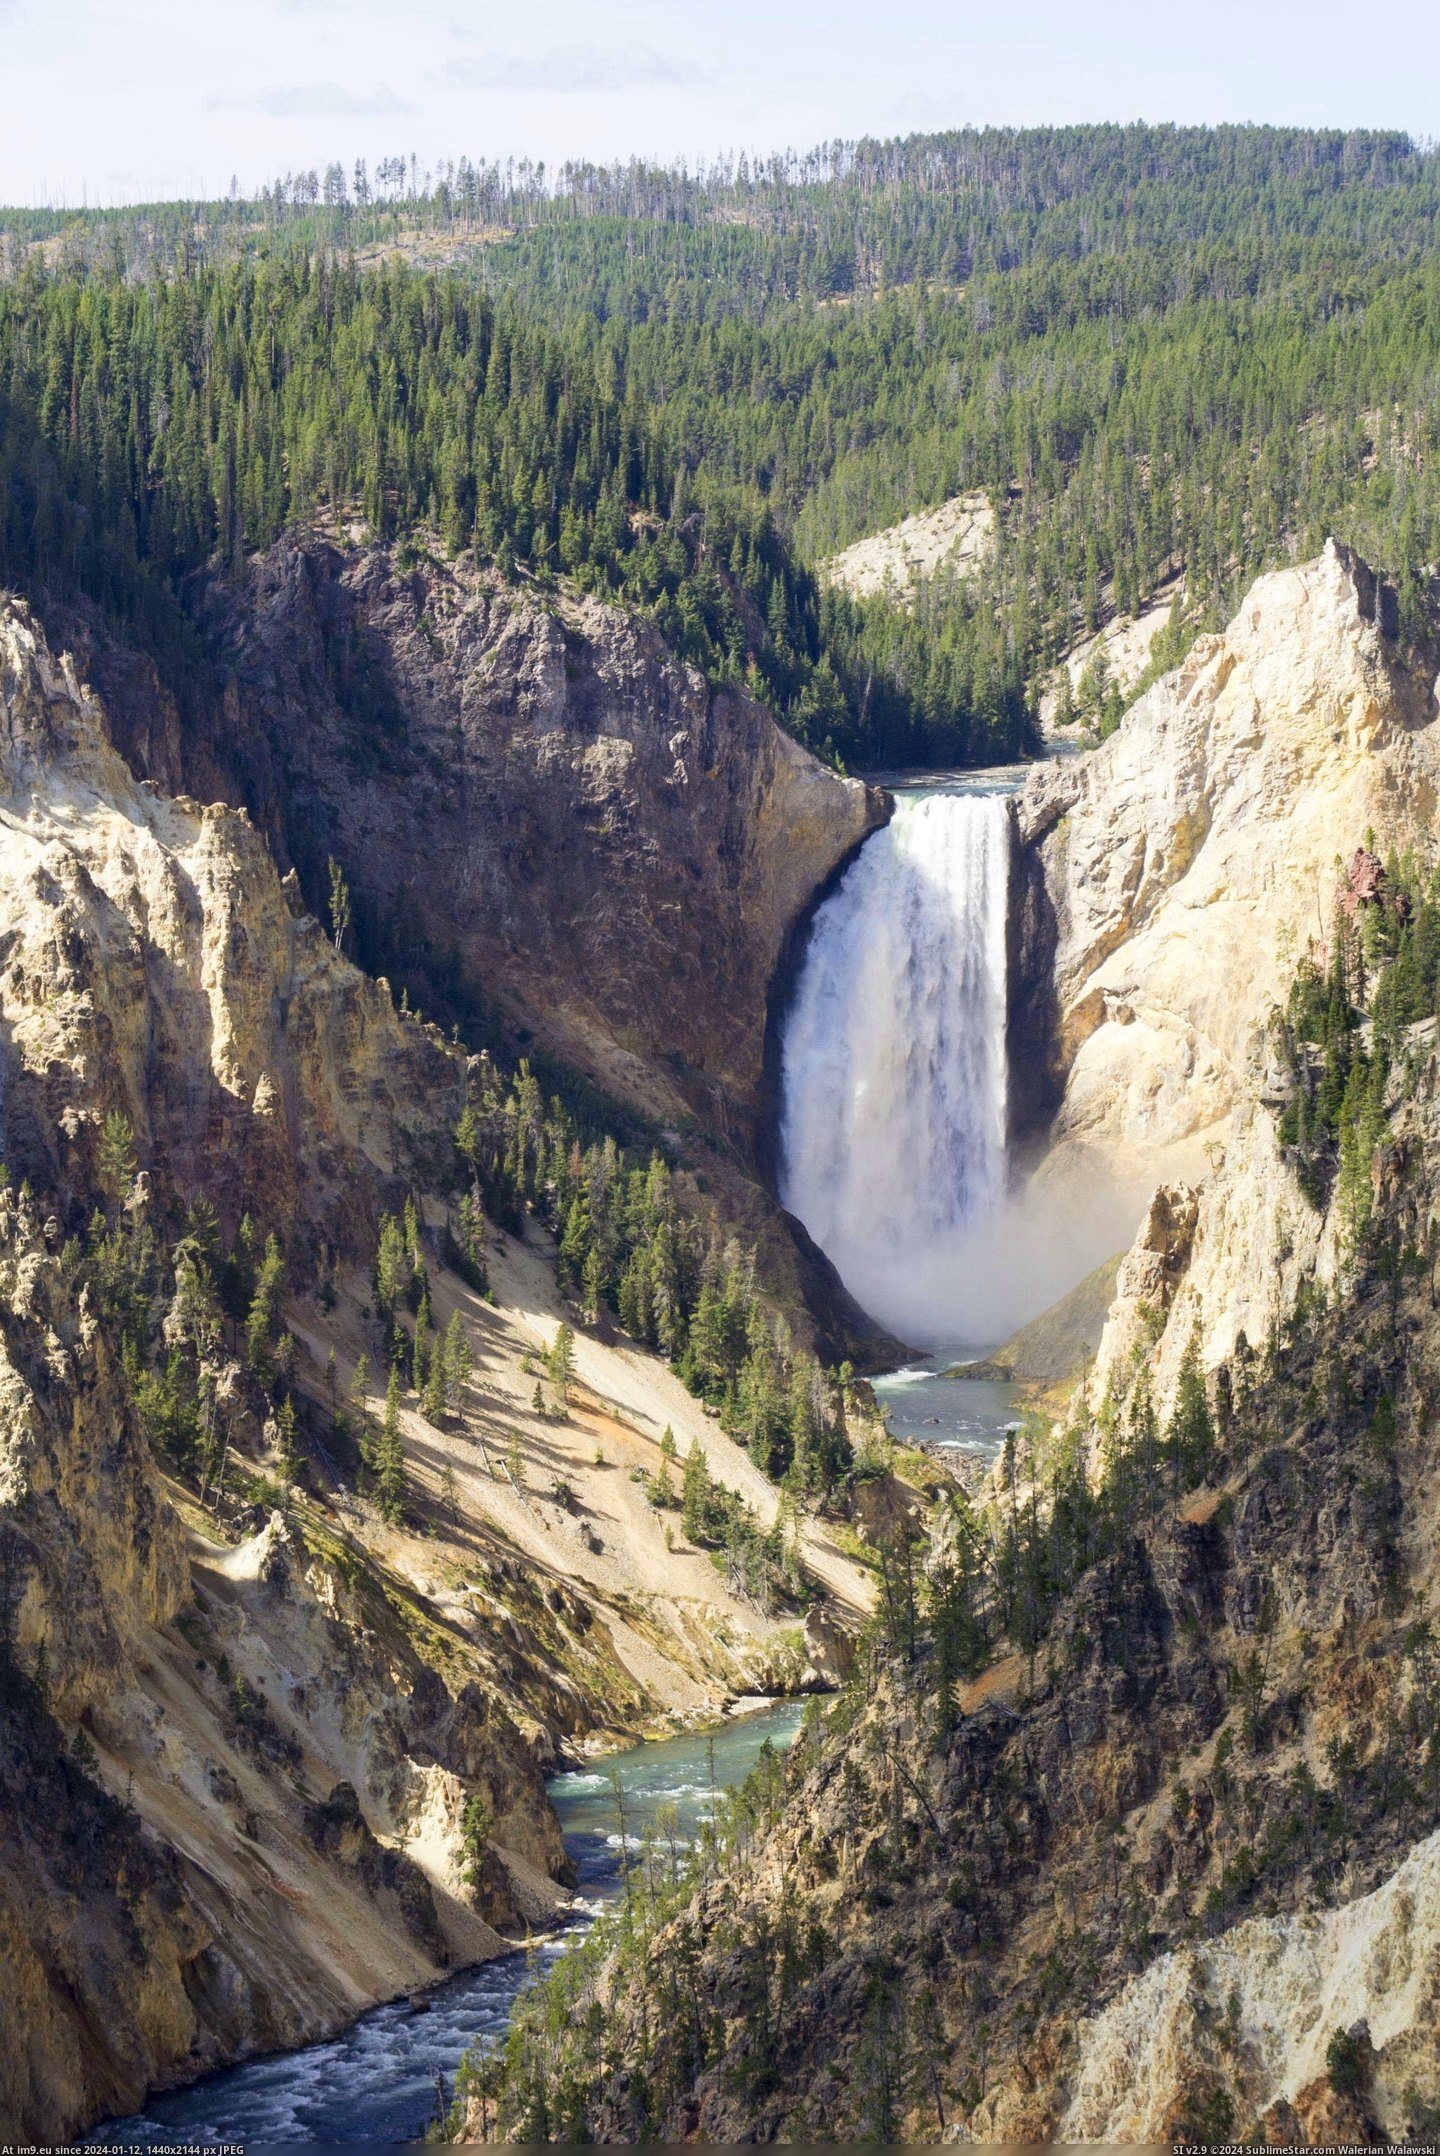 #Canyon #Usa #Grand #Waterfalls #Cloudy #Chance #Yellowstone #Wyoming [Earthporn] Partly cloudy with a chance of waterfalls: Grand Canyon of the Yellowstone, Wyoming, USA  [2332x3484] Pic. (Изображение из альбом My r/EARTHPORN favs))